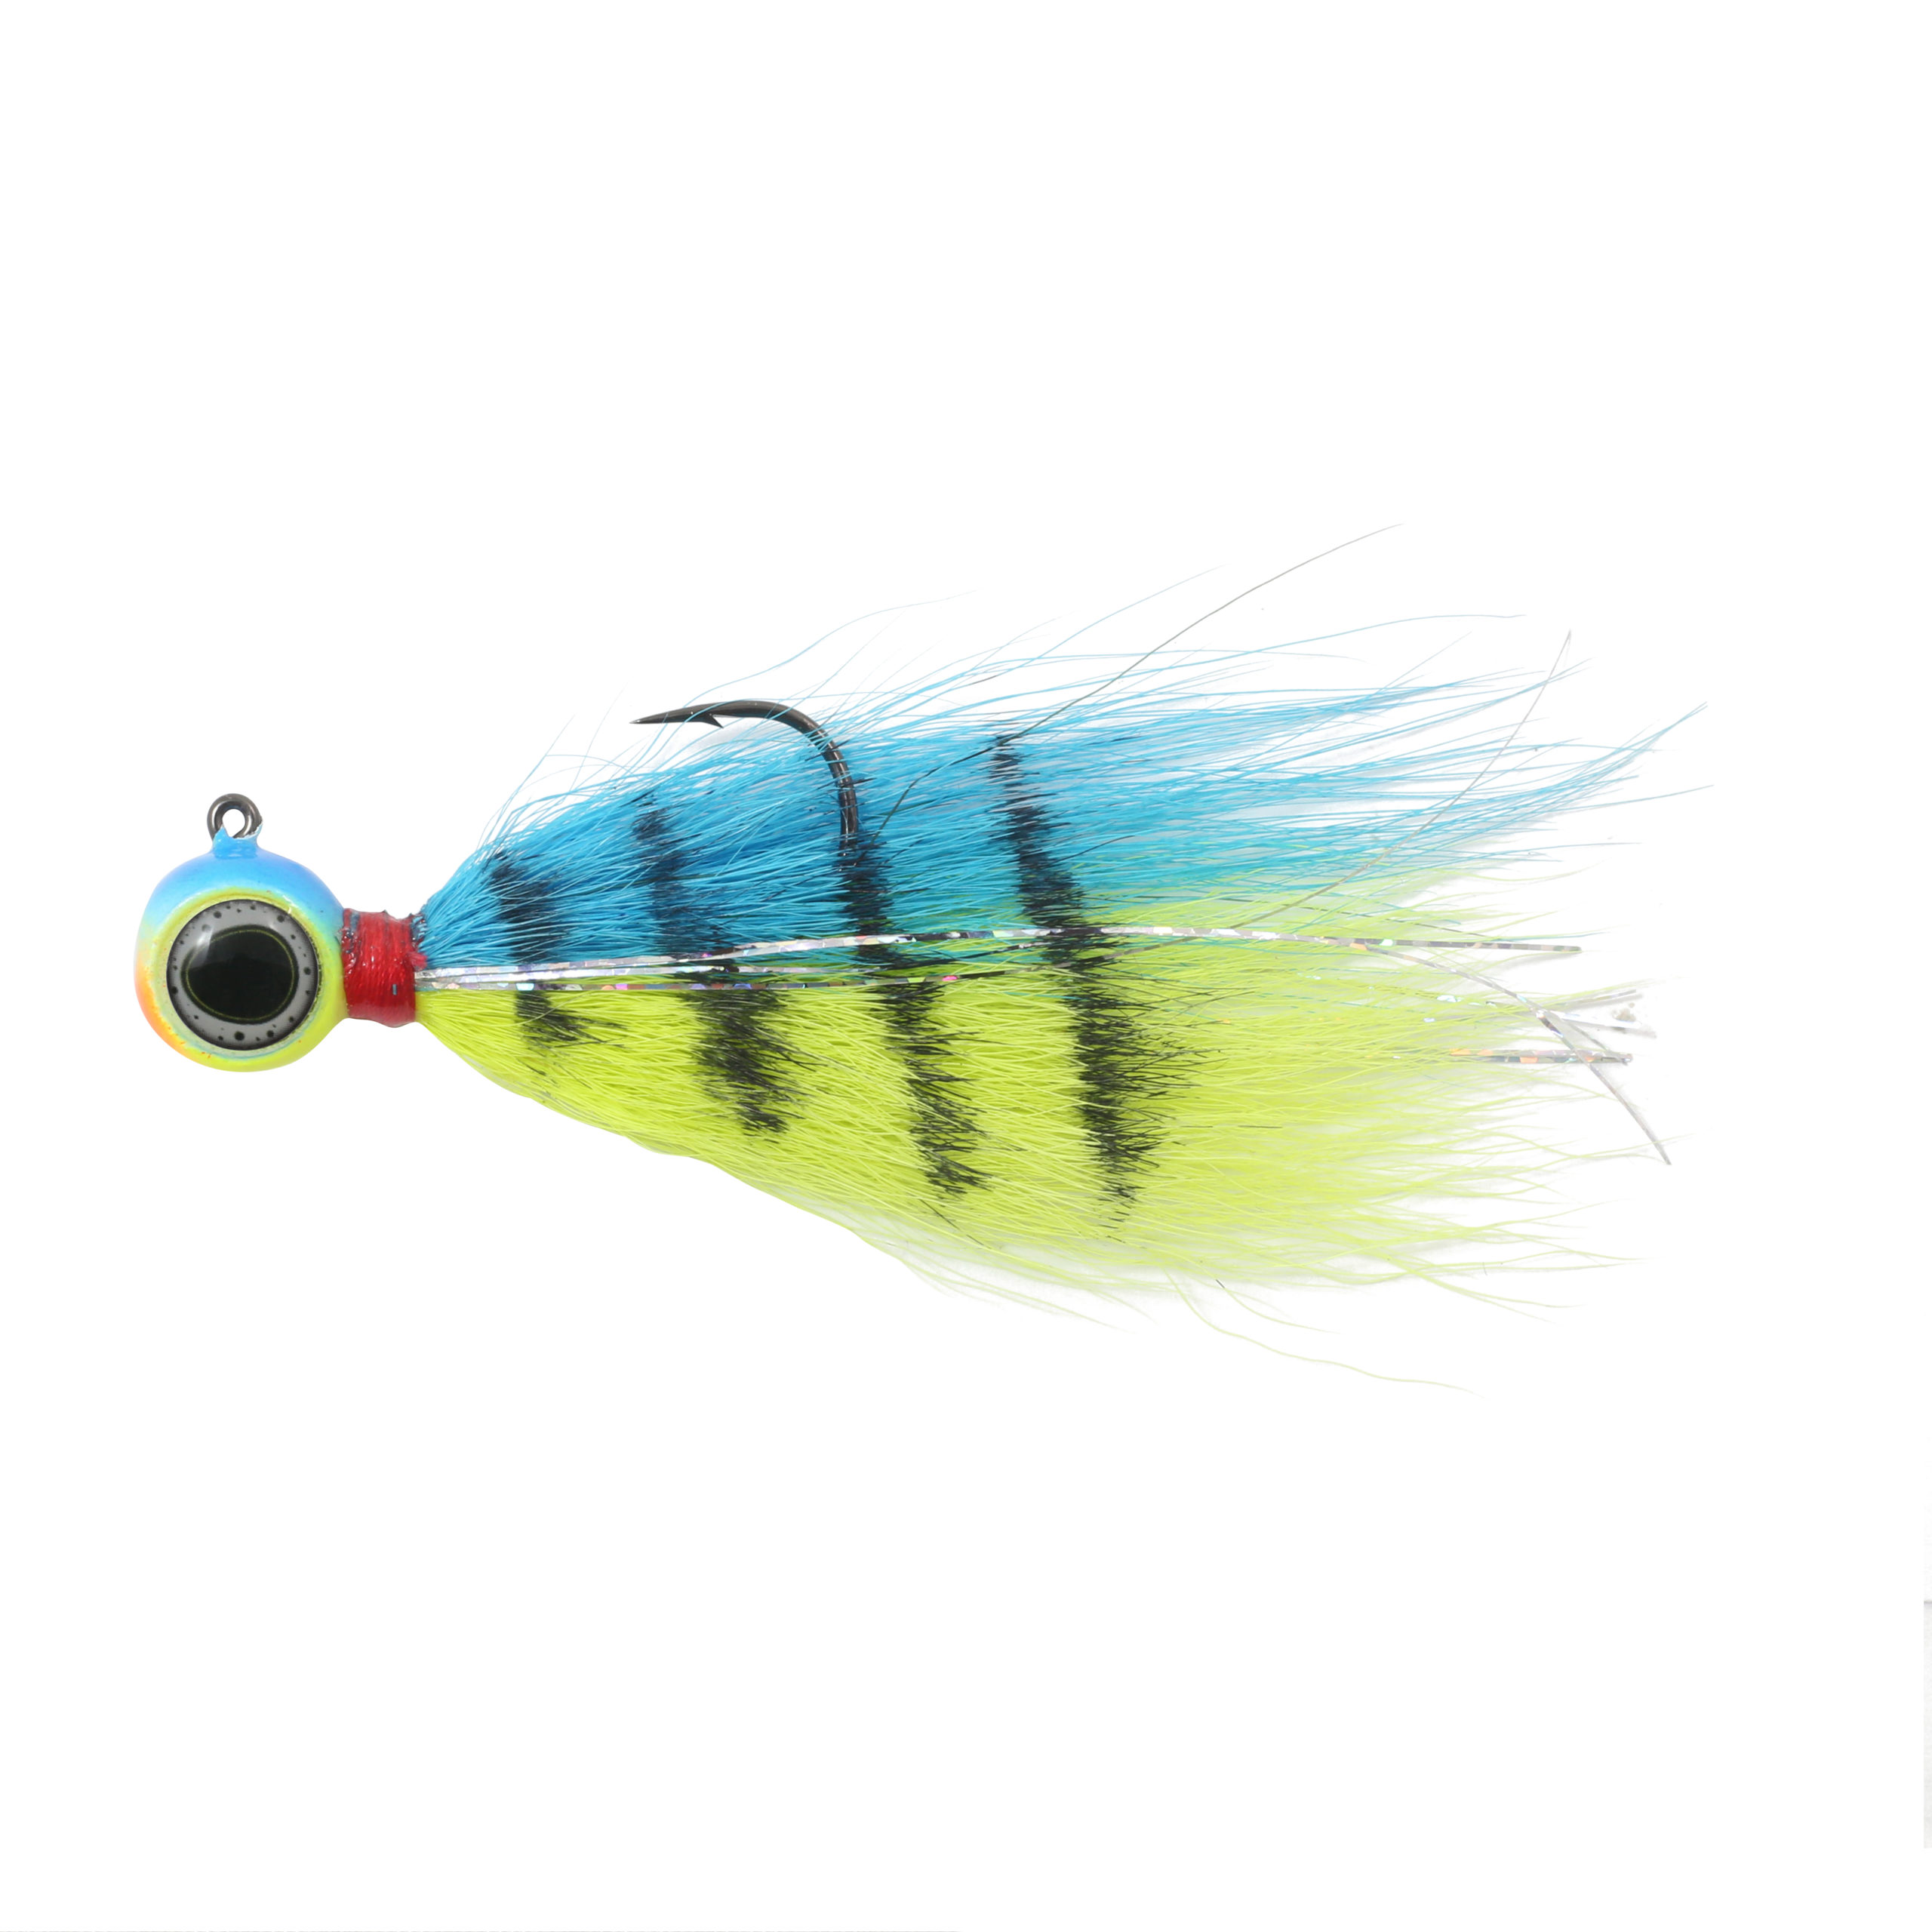 Deep-Vee Bucktail Jig from Northland Fishing Tackle in Parrot color